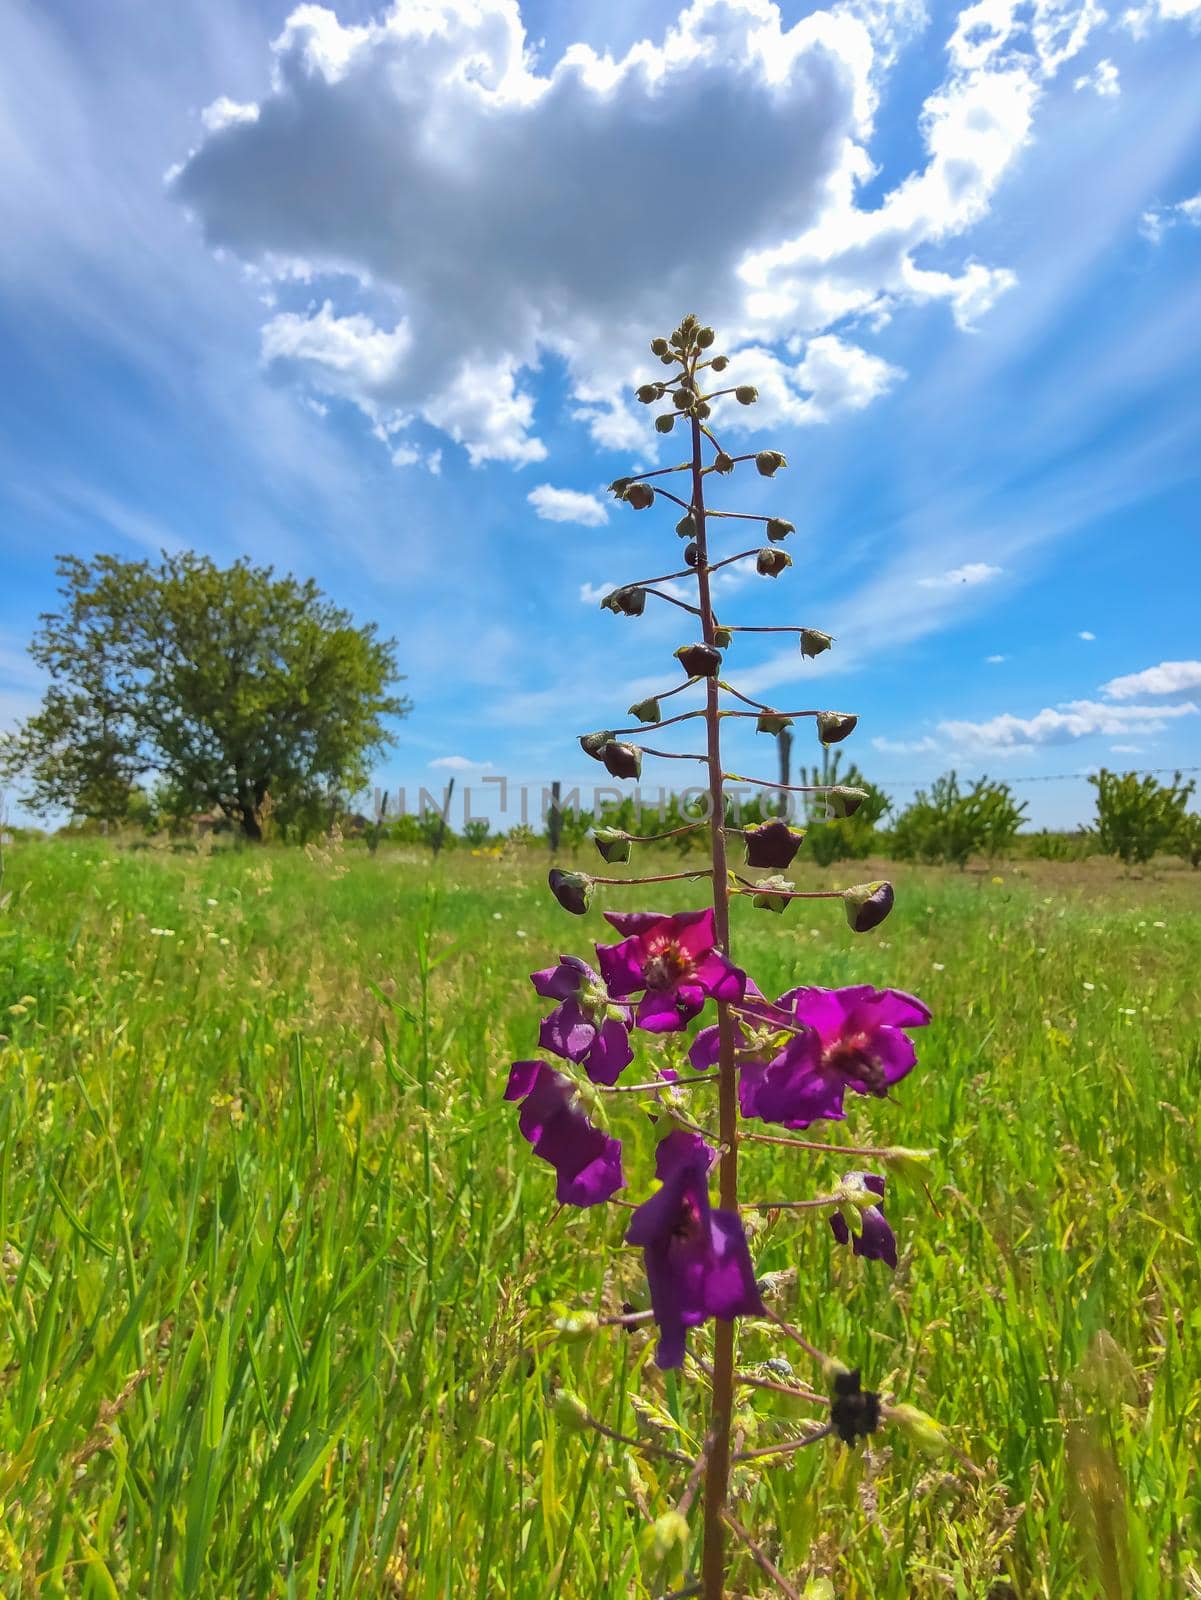 Purple flower in the green field with blue sky. Spring background. by igor010